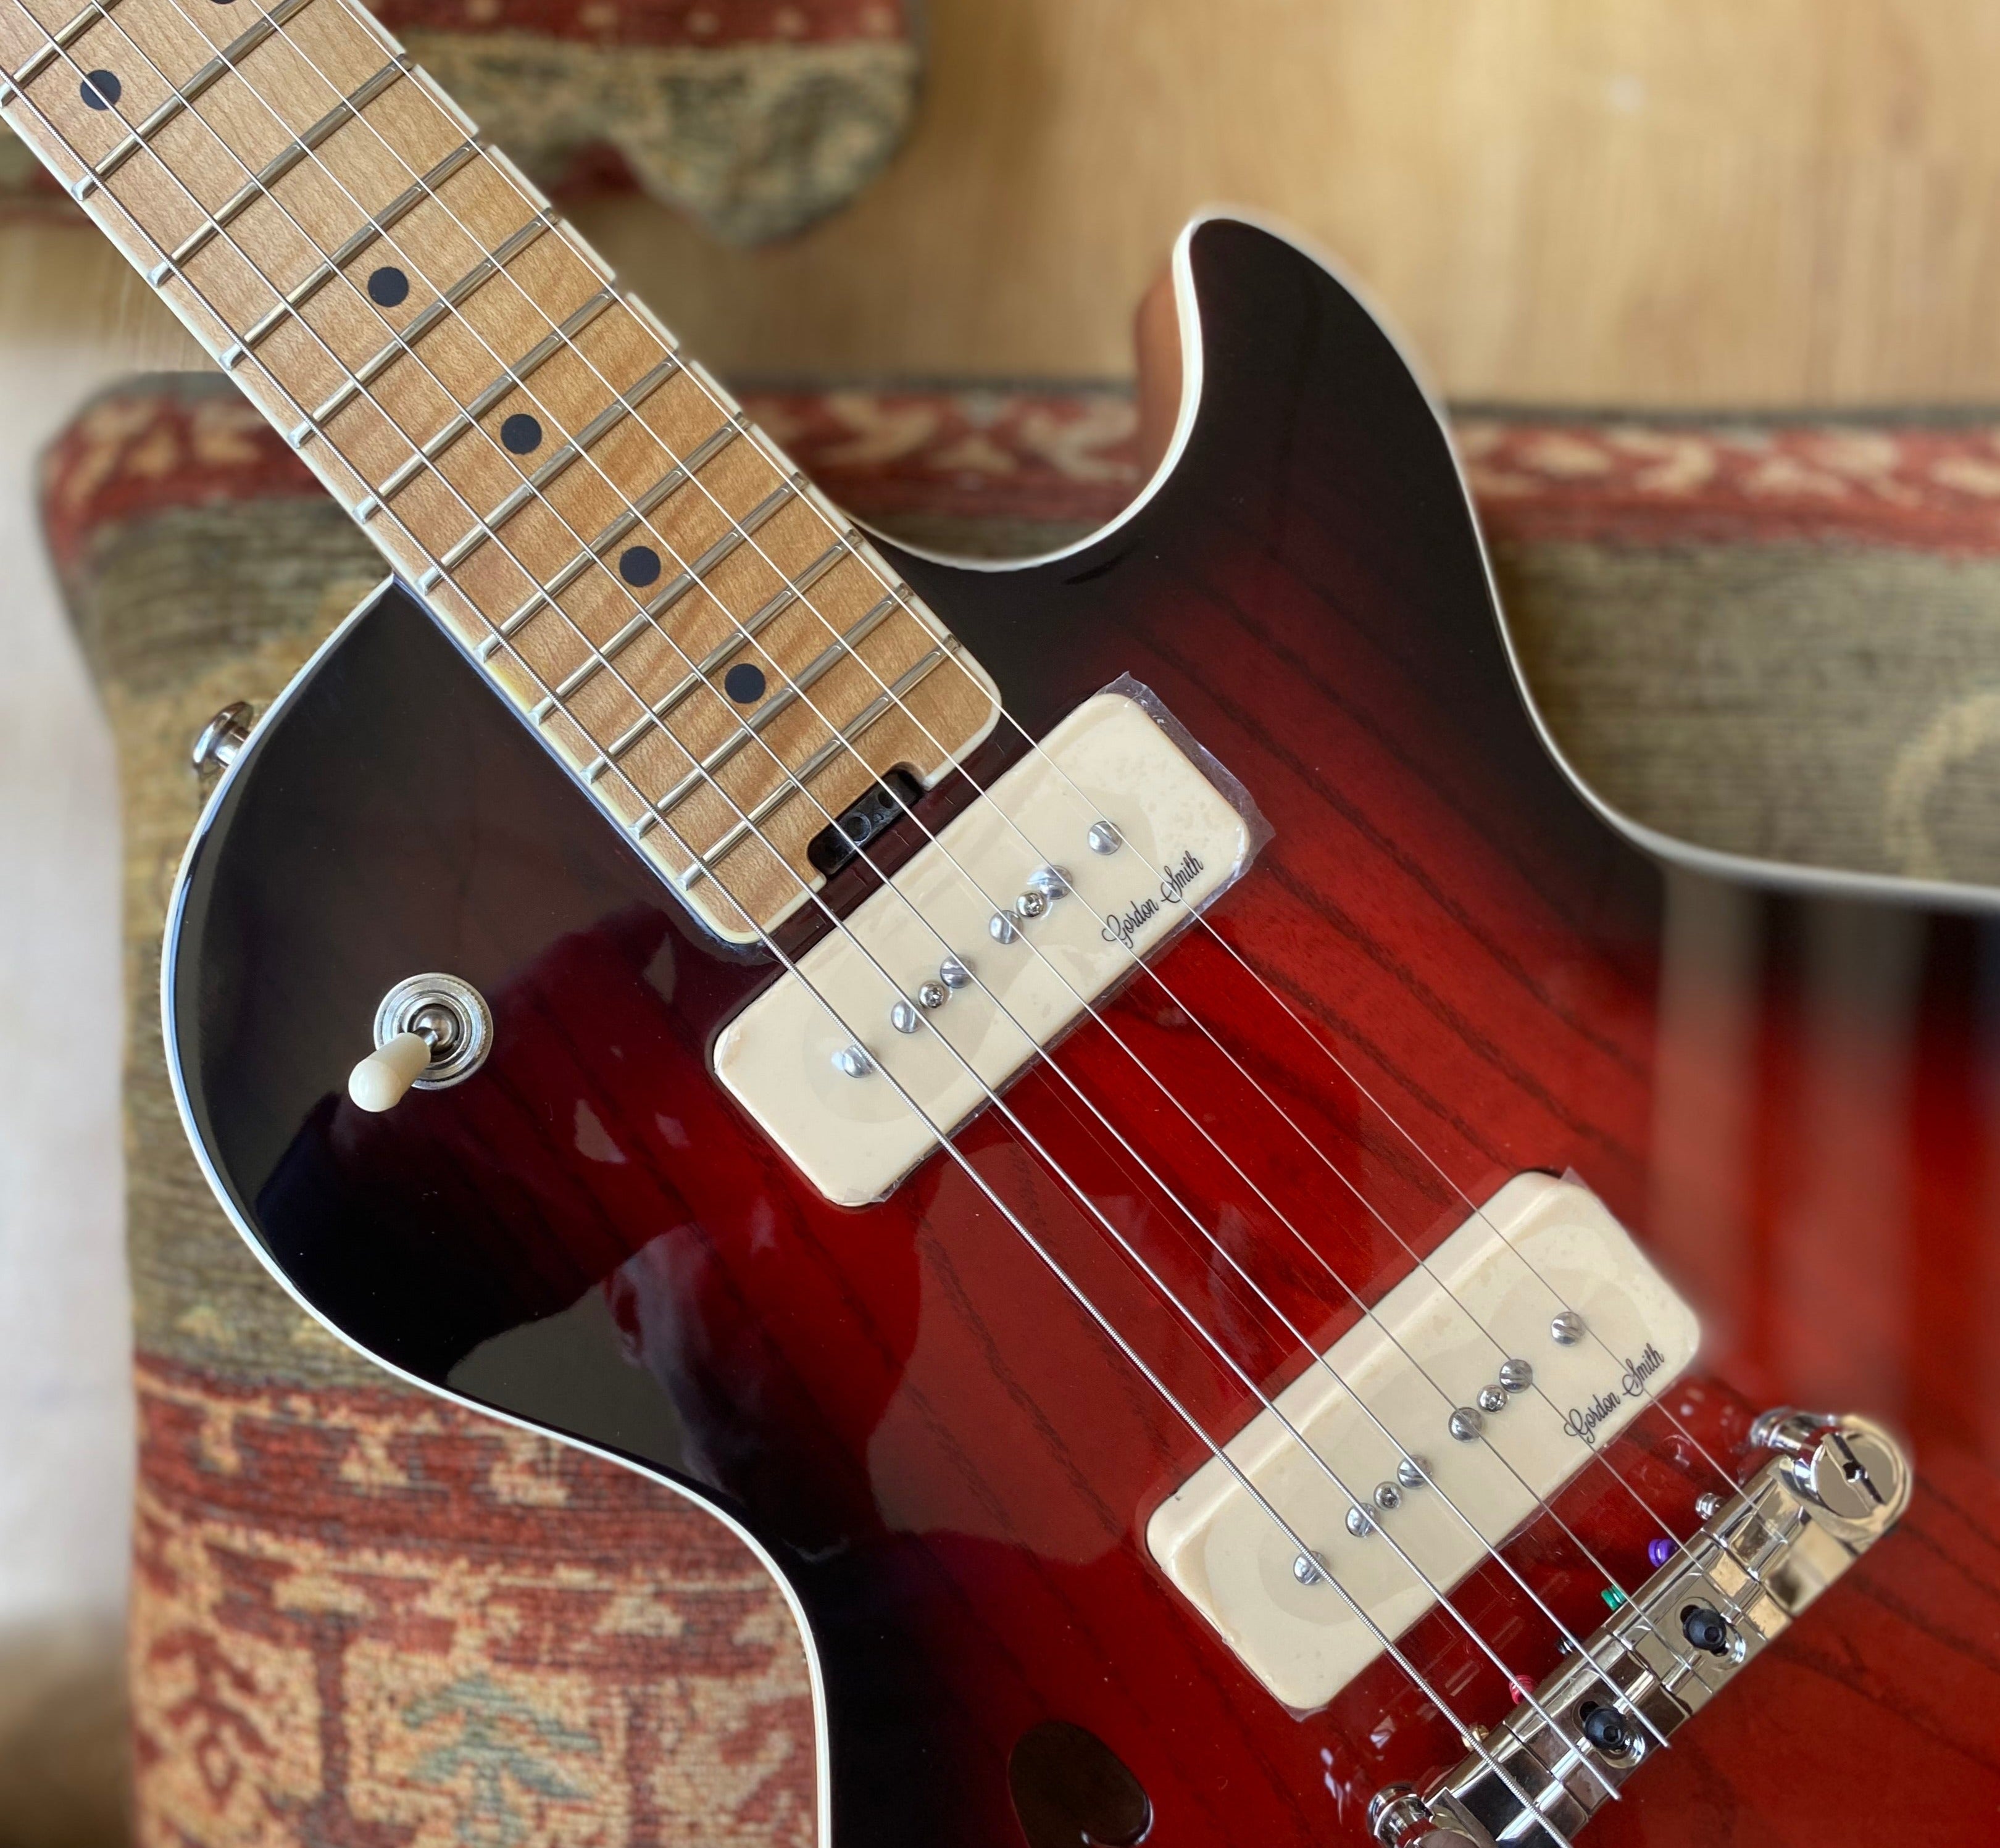 Gordon Smith GS Deluxe Semi Solid 60 Swamp Ash Top Custom Strawberry Burst, Electric Guitar for sale at Richards Guitars.